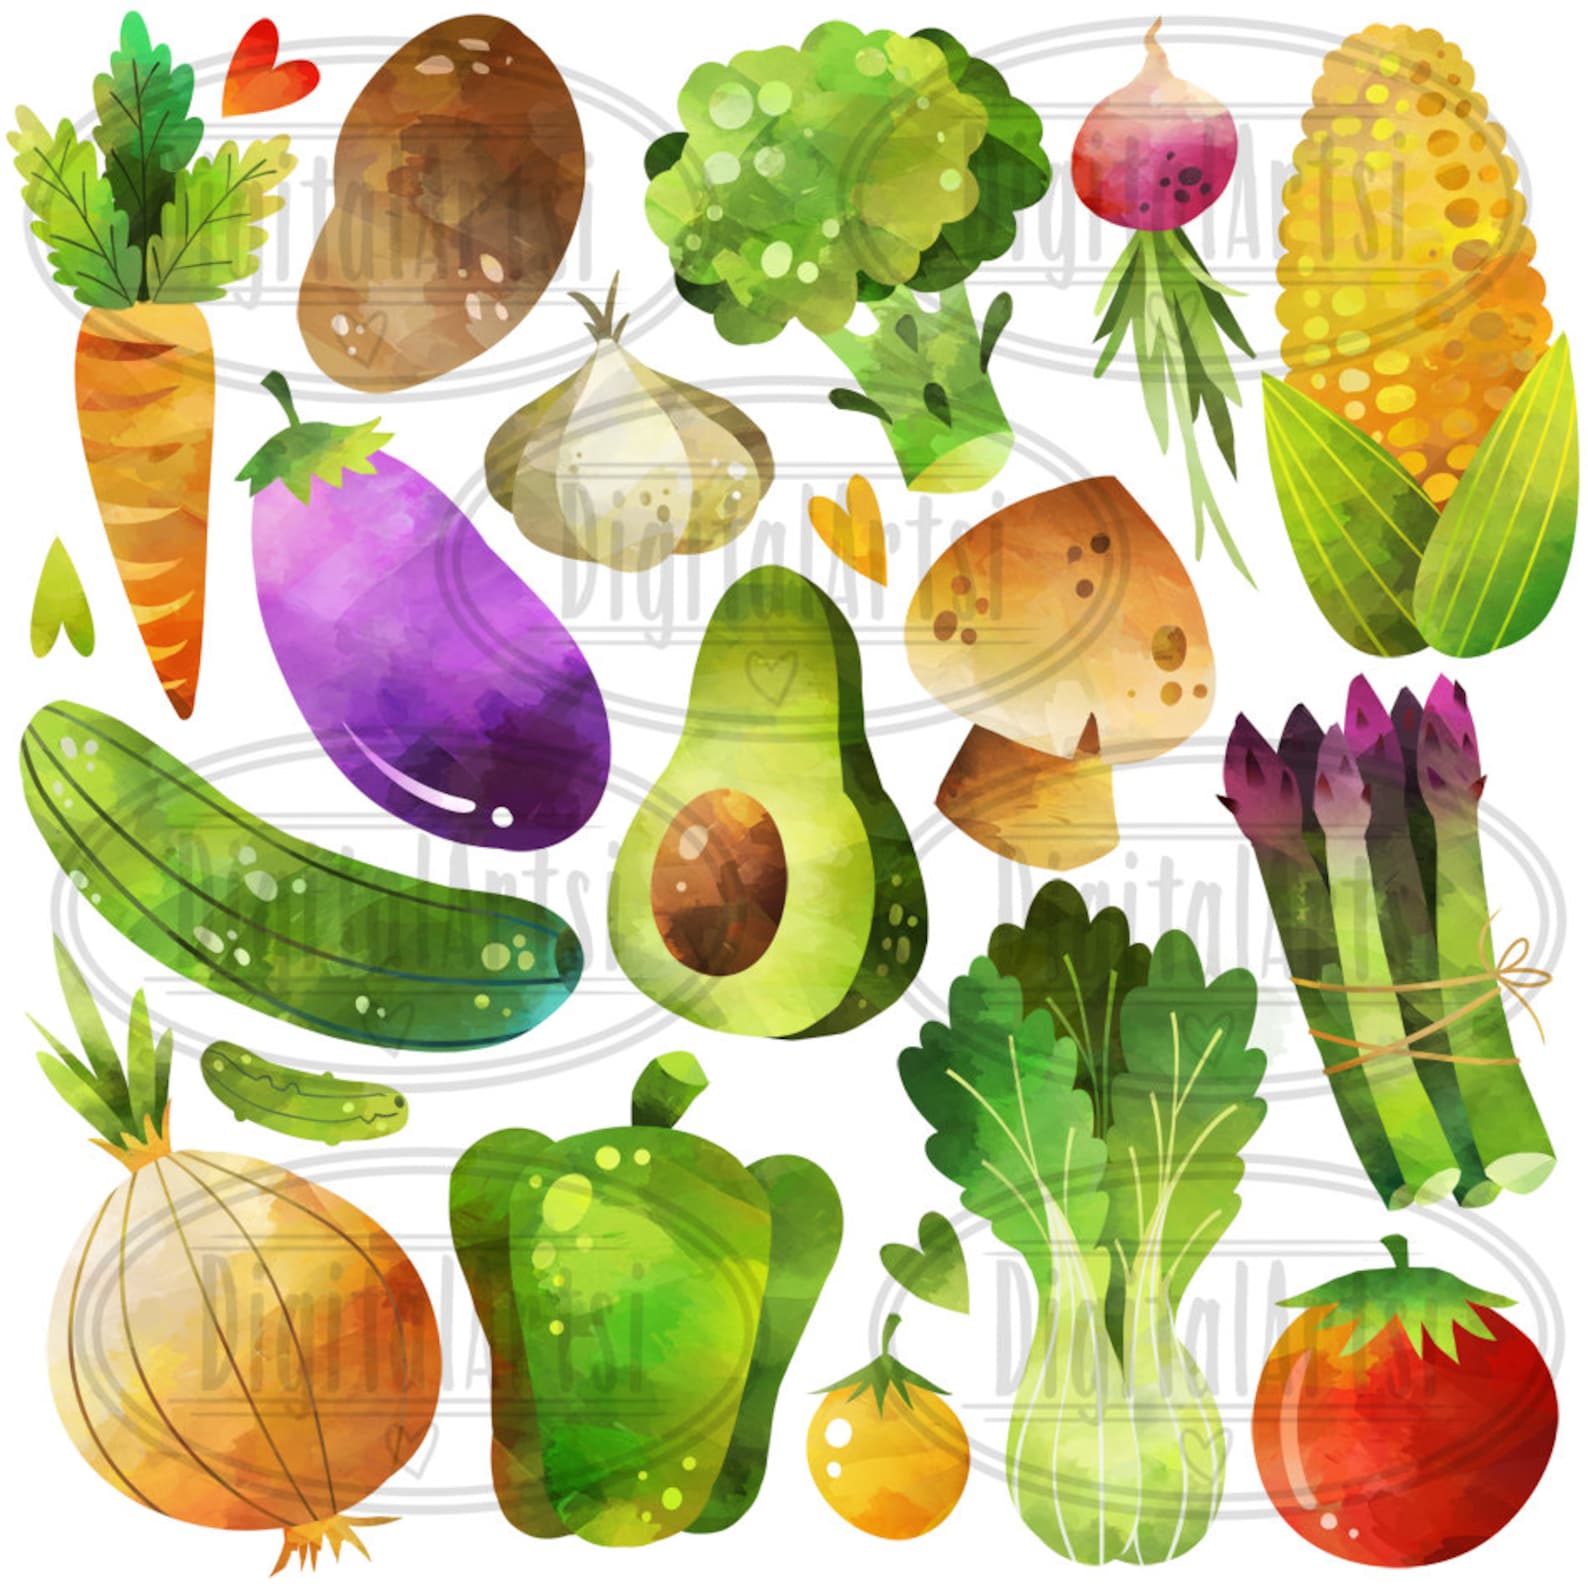 Watercolor Vegetables Clipart Healthy Food Download - Etsy